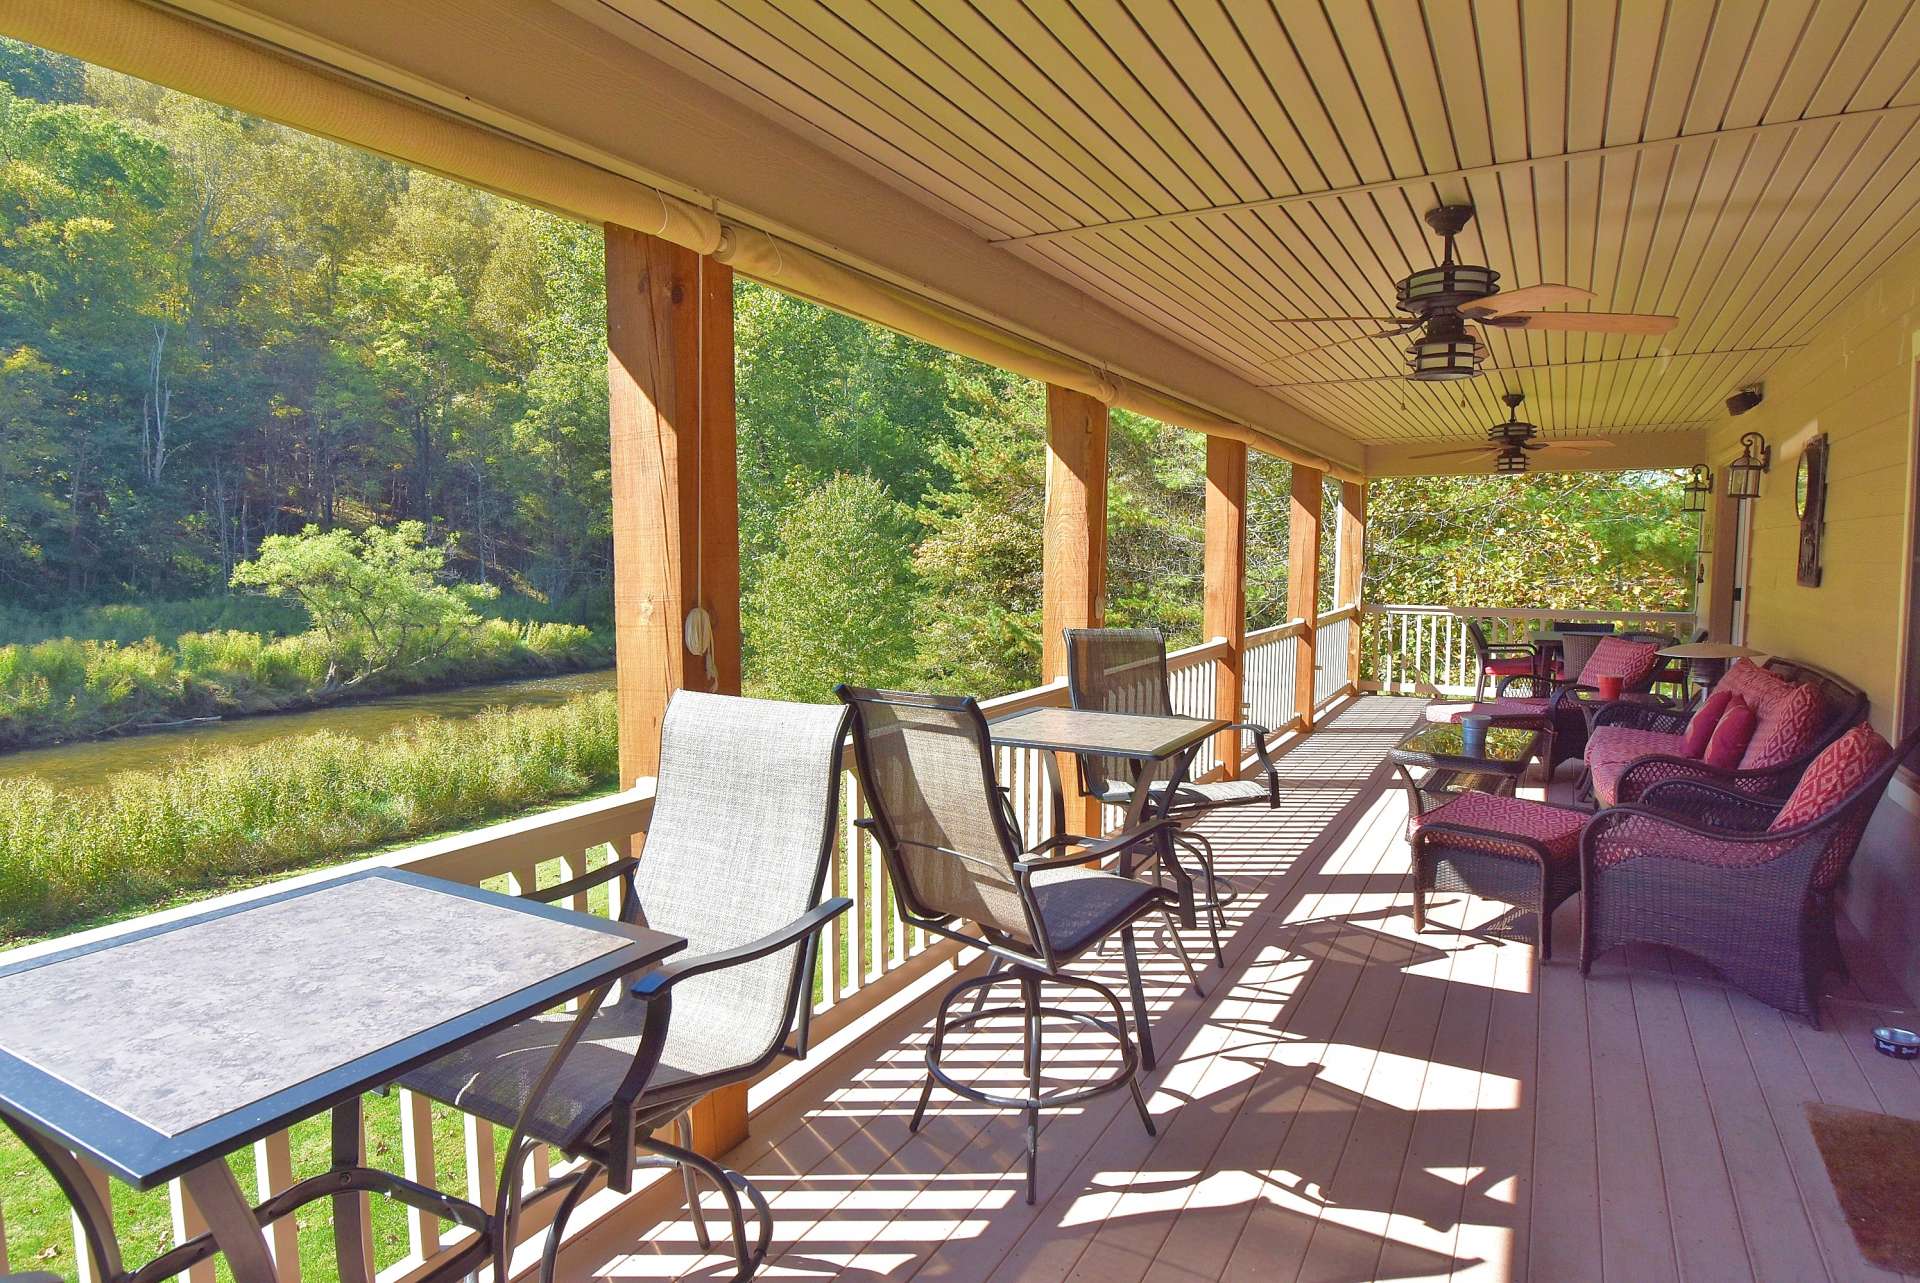 A full length covered back porch is an ideal place for outdoor grilling, dining, and entertaining.  Or simply relax with your favorite drink and  enjoy the river as it flows below.